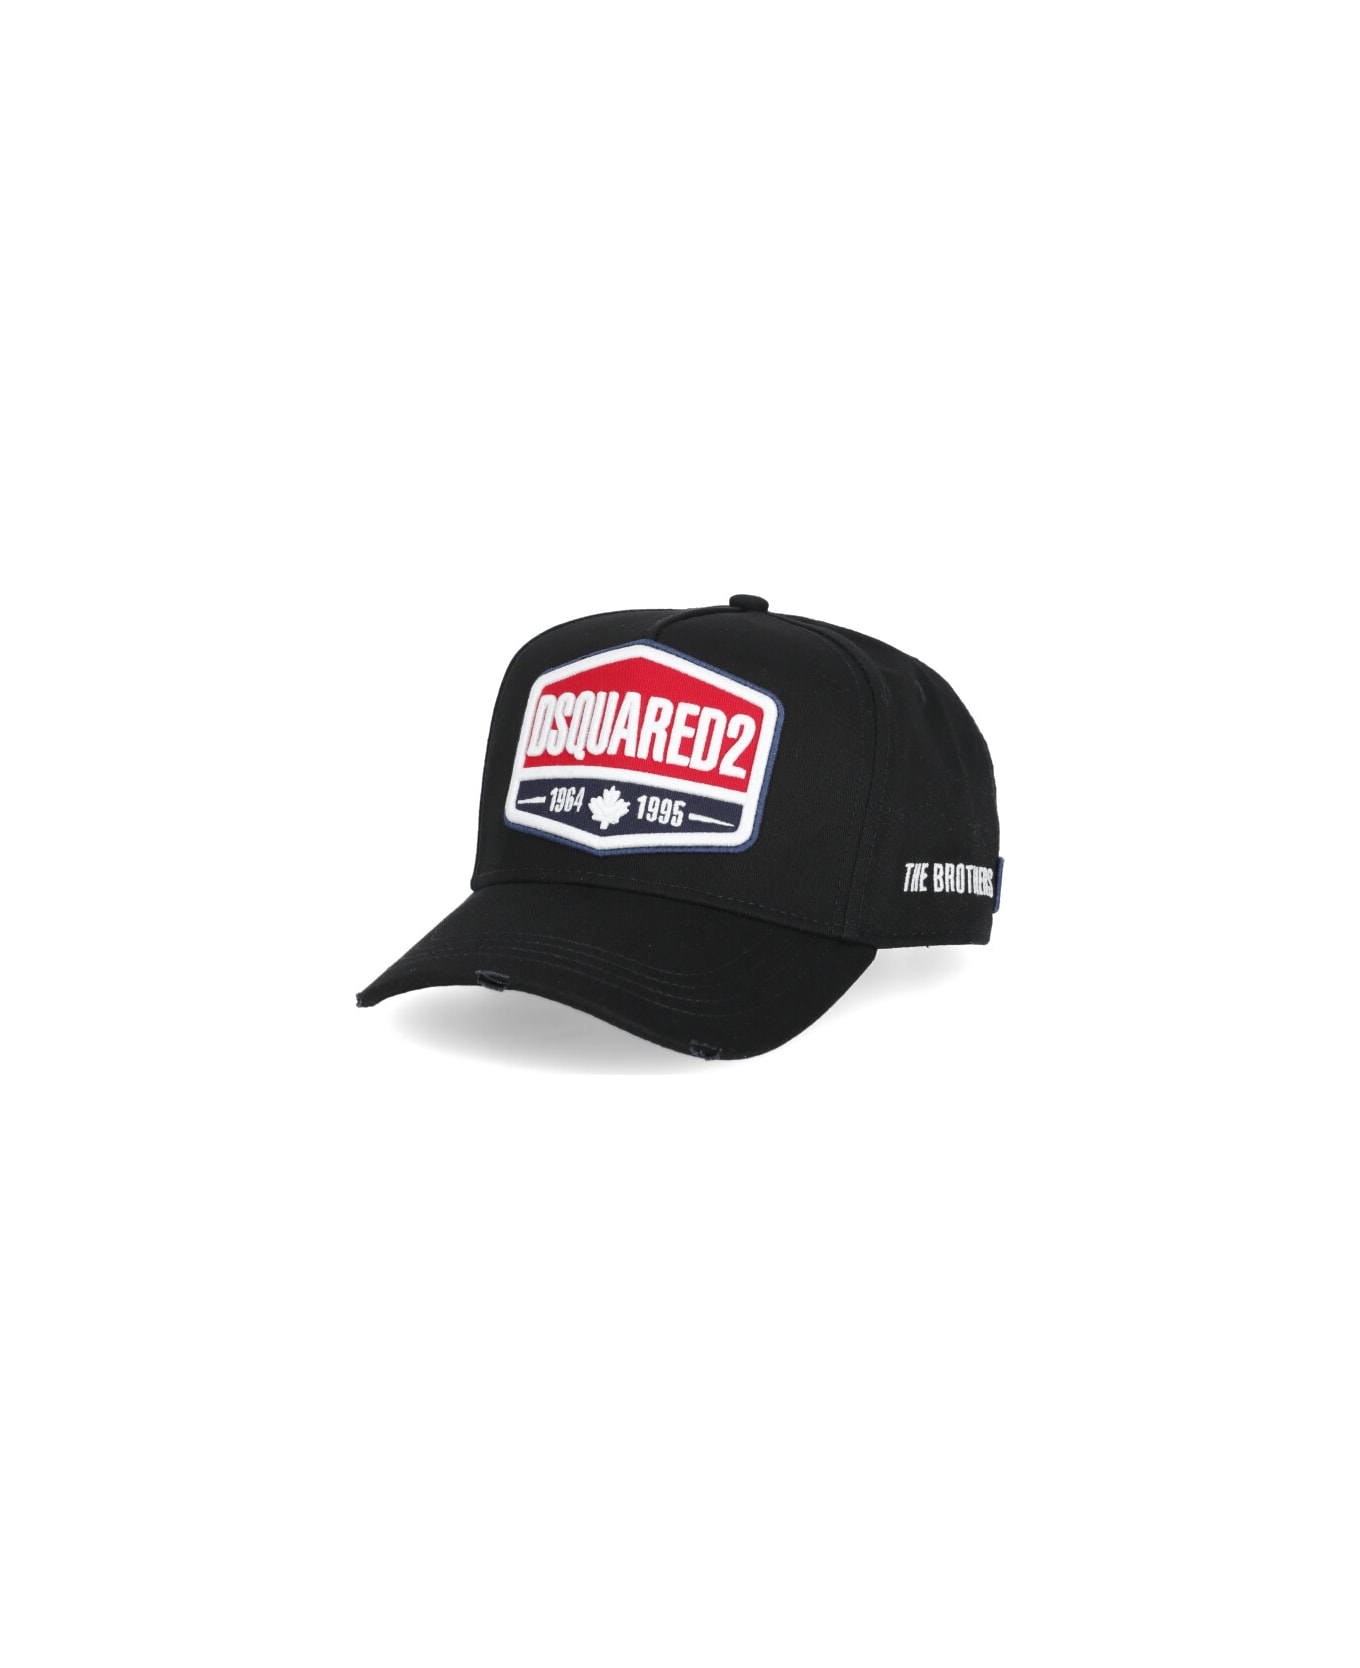 Dsquared2 Baseball Cap With Embroidered Patch - Black 帽子